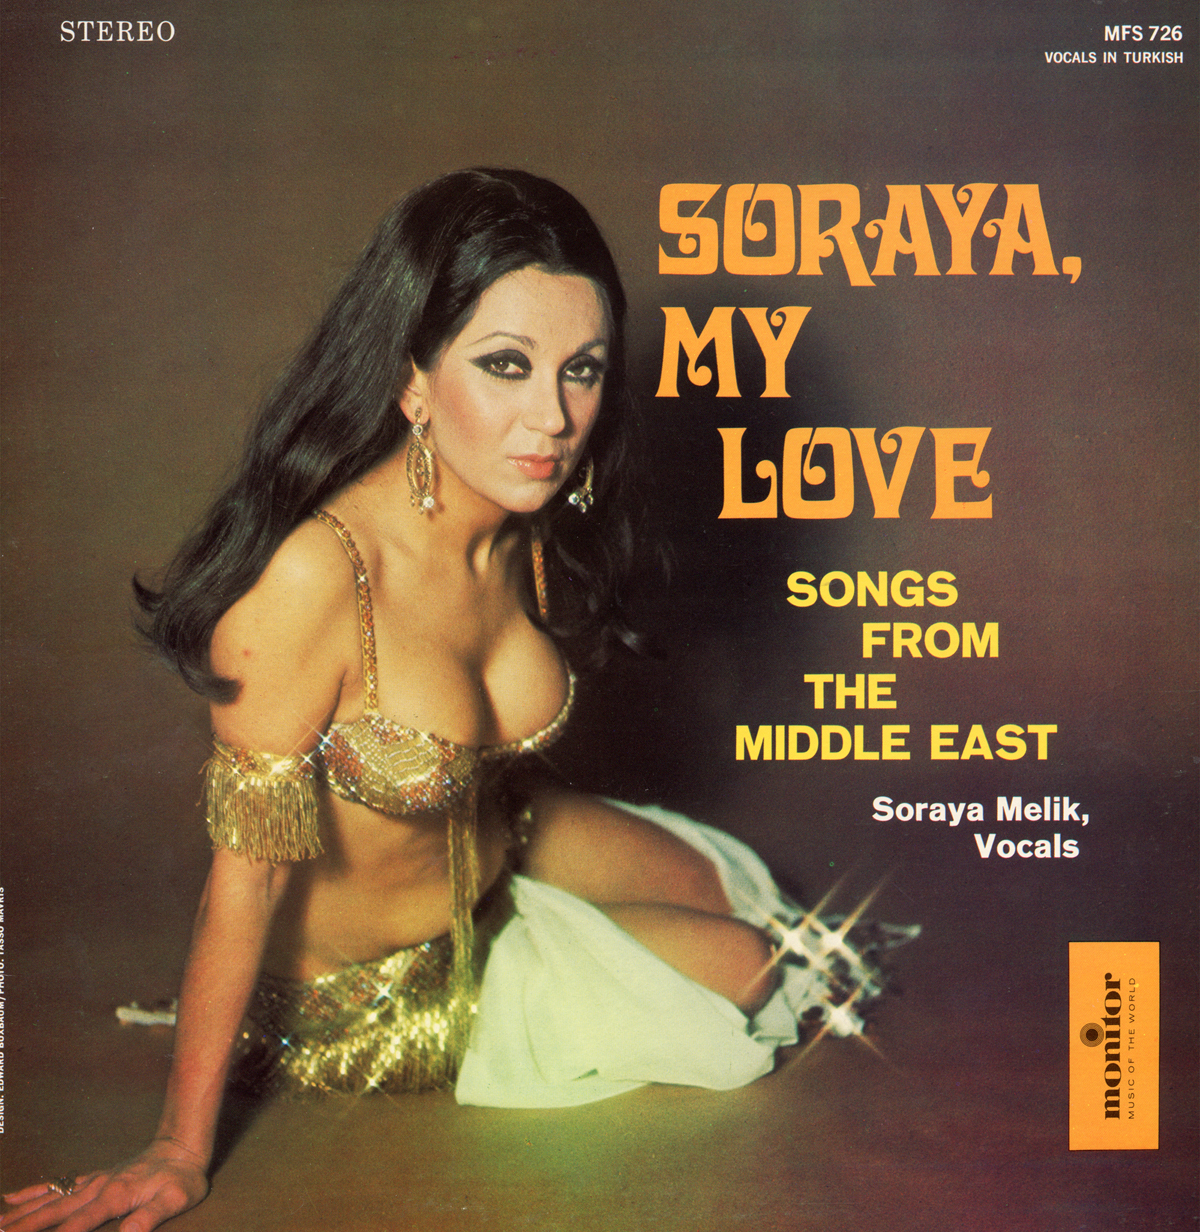 SORAYA, MY LOVE: SONGS FROM THE MIDDLE EAST